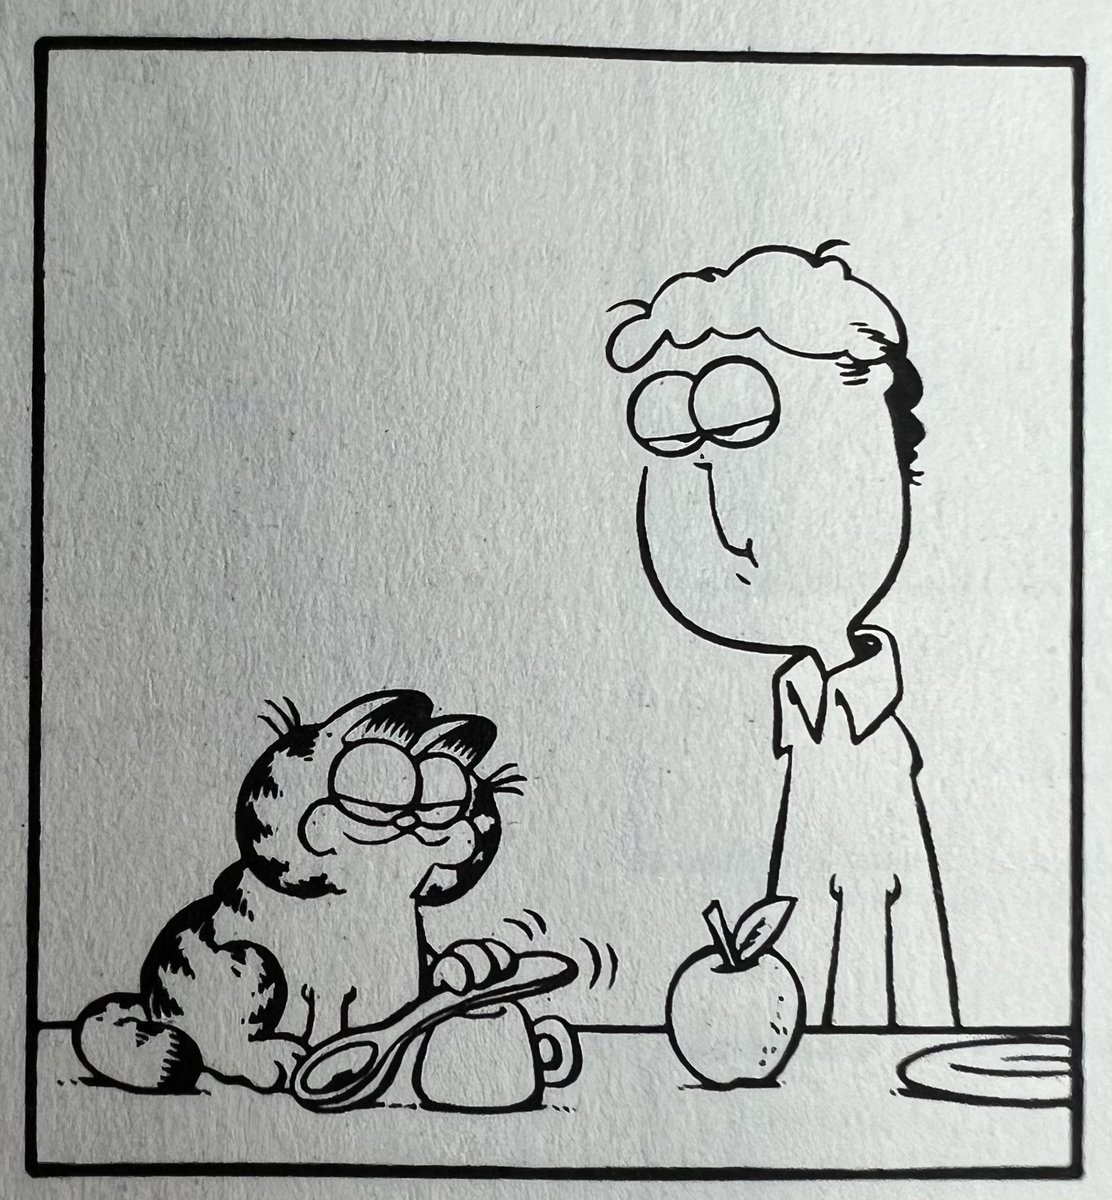 Garfield is so cute in the early comic strips